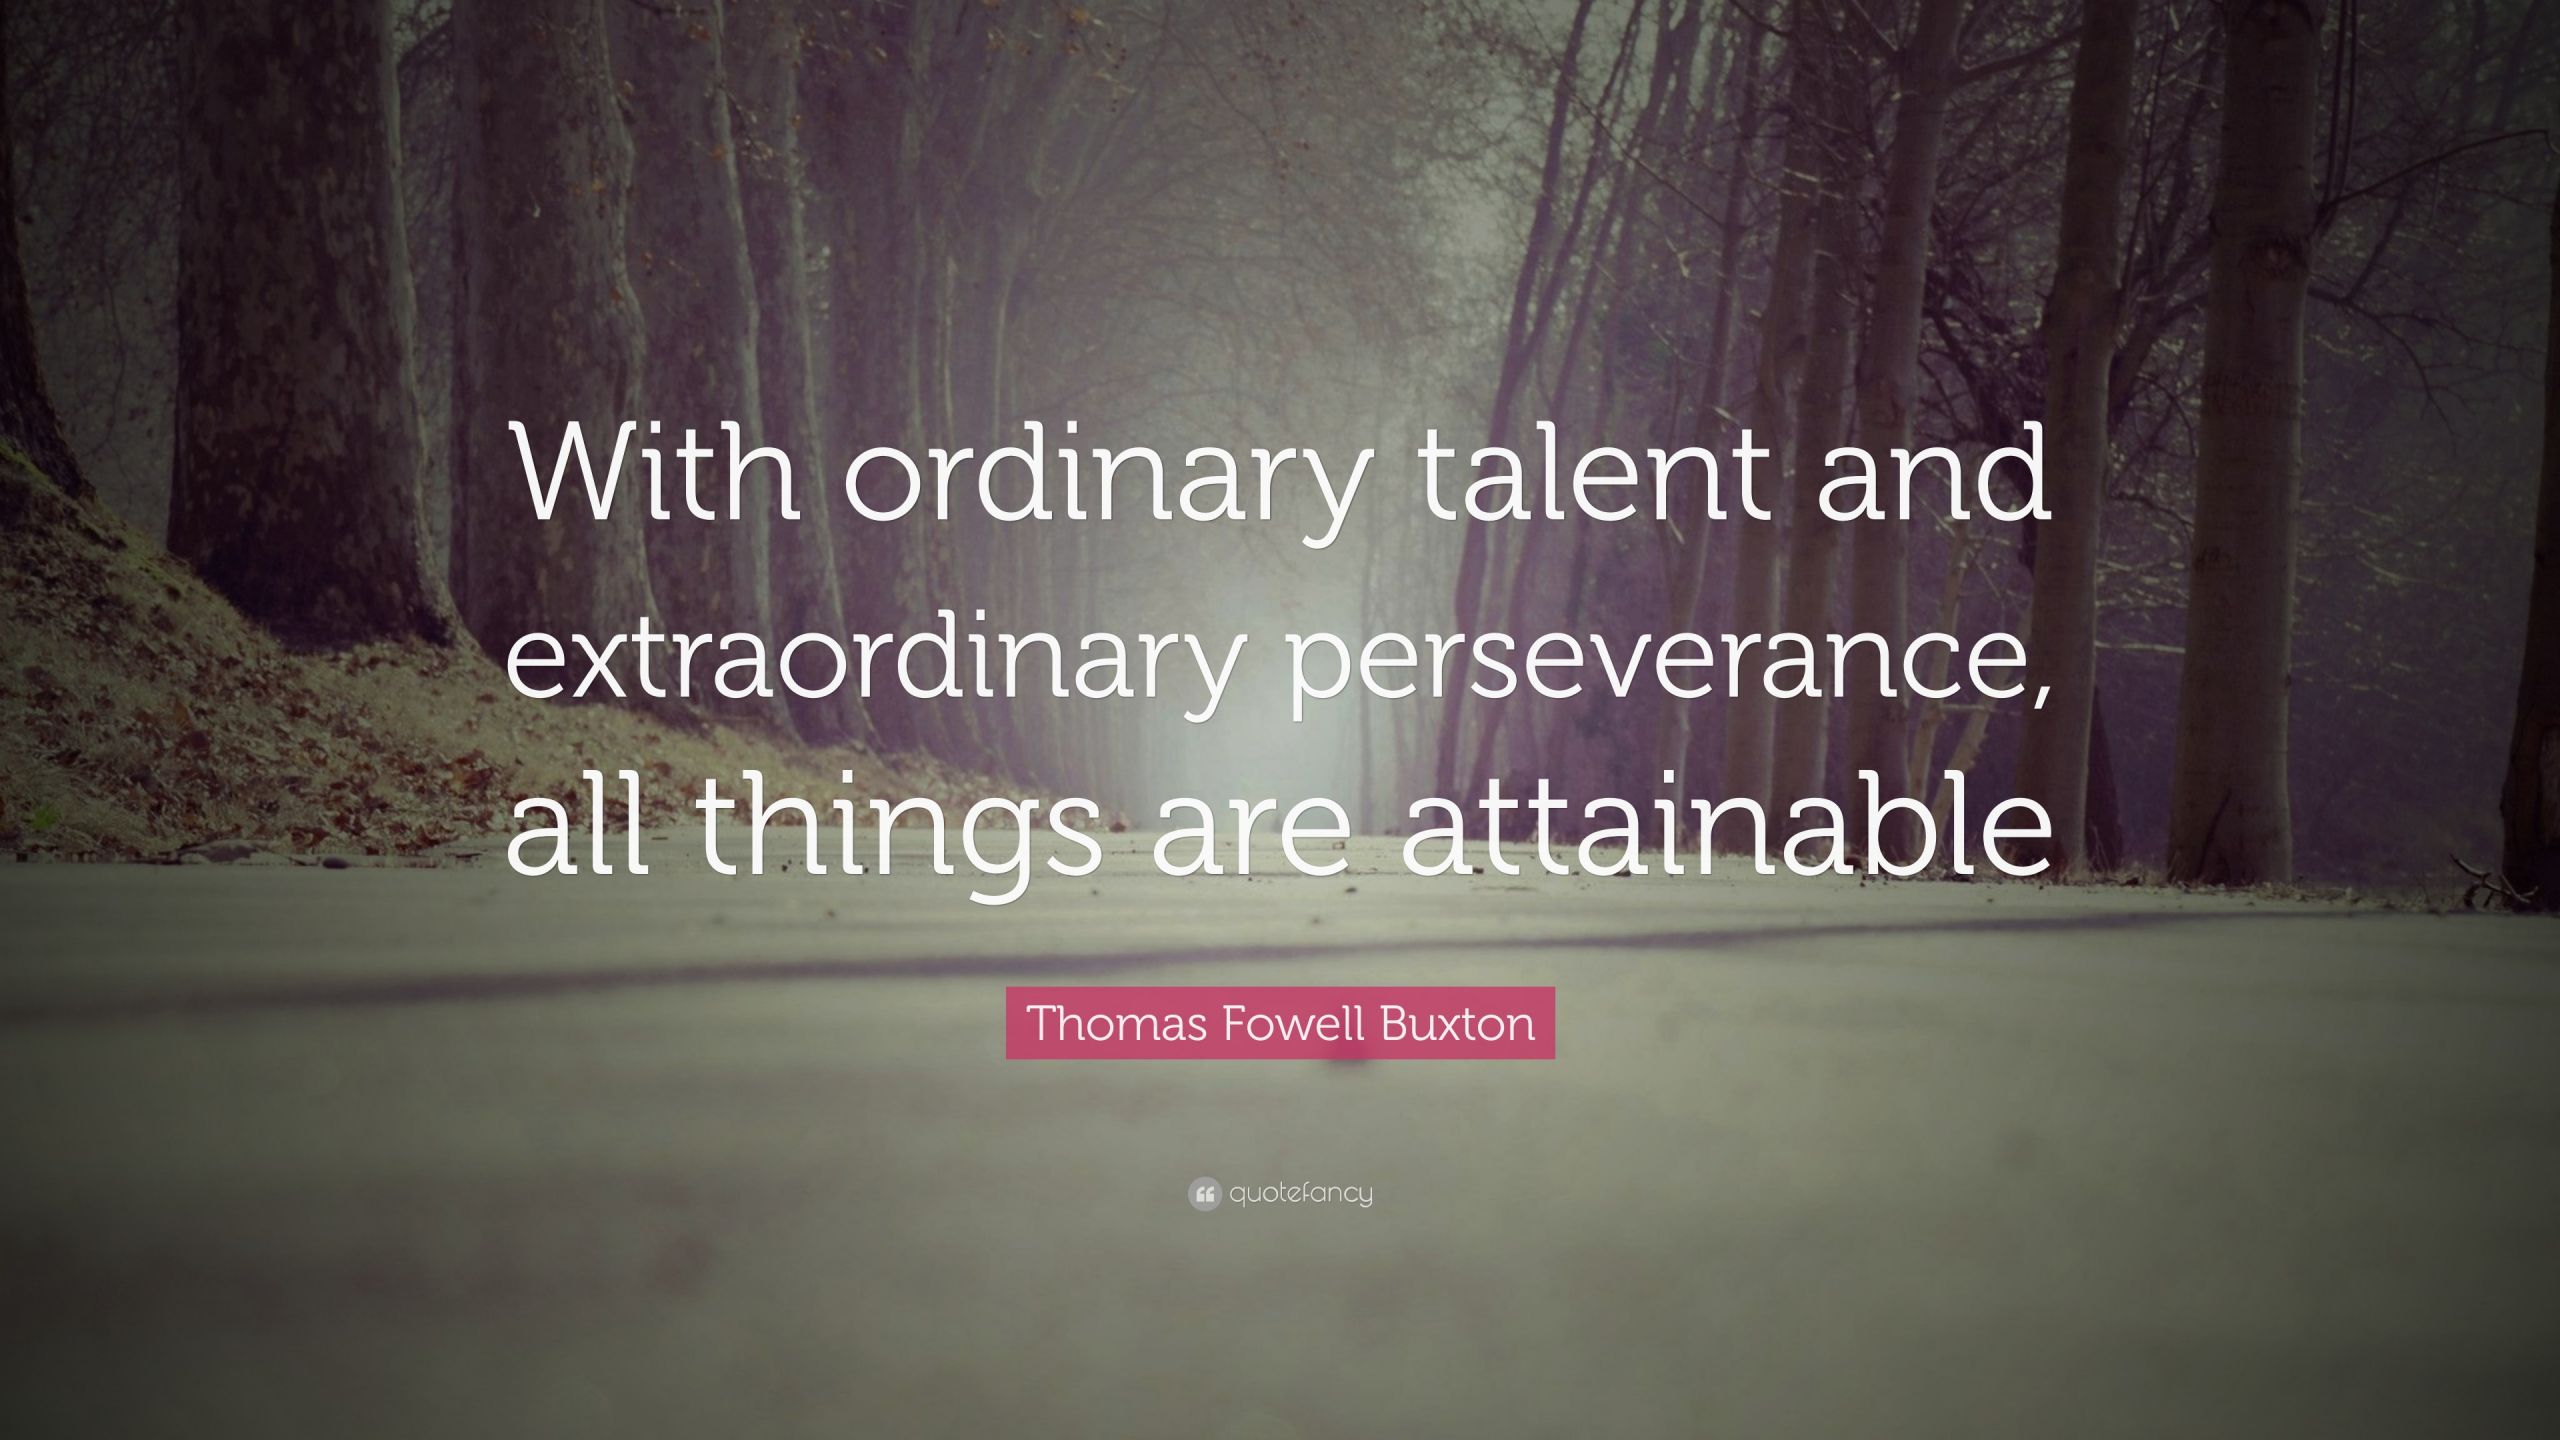 Inspirational Quotes About Perseverance
 Perseverance Quotes 58 wallpapers Quotefancy